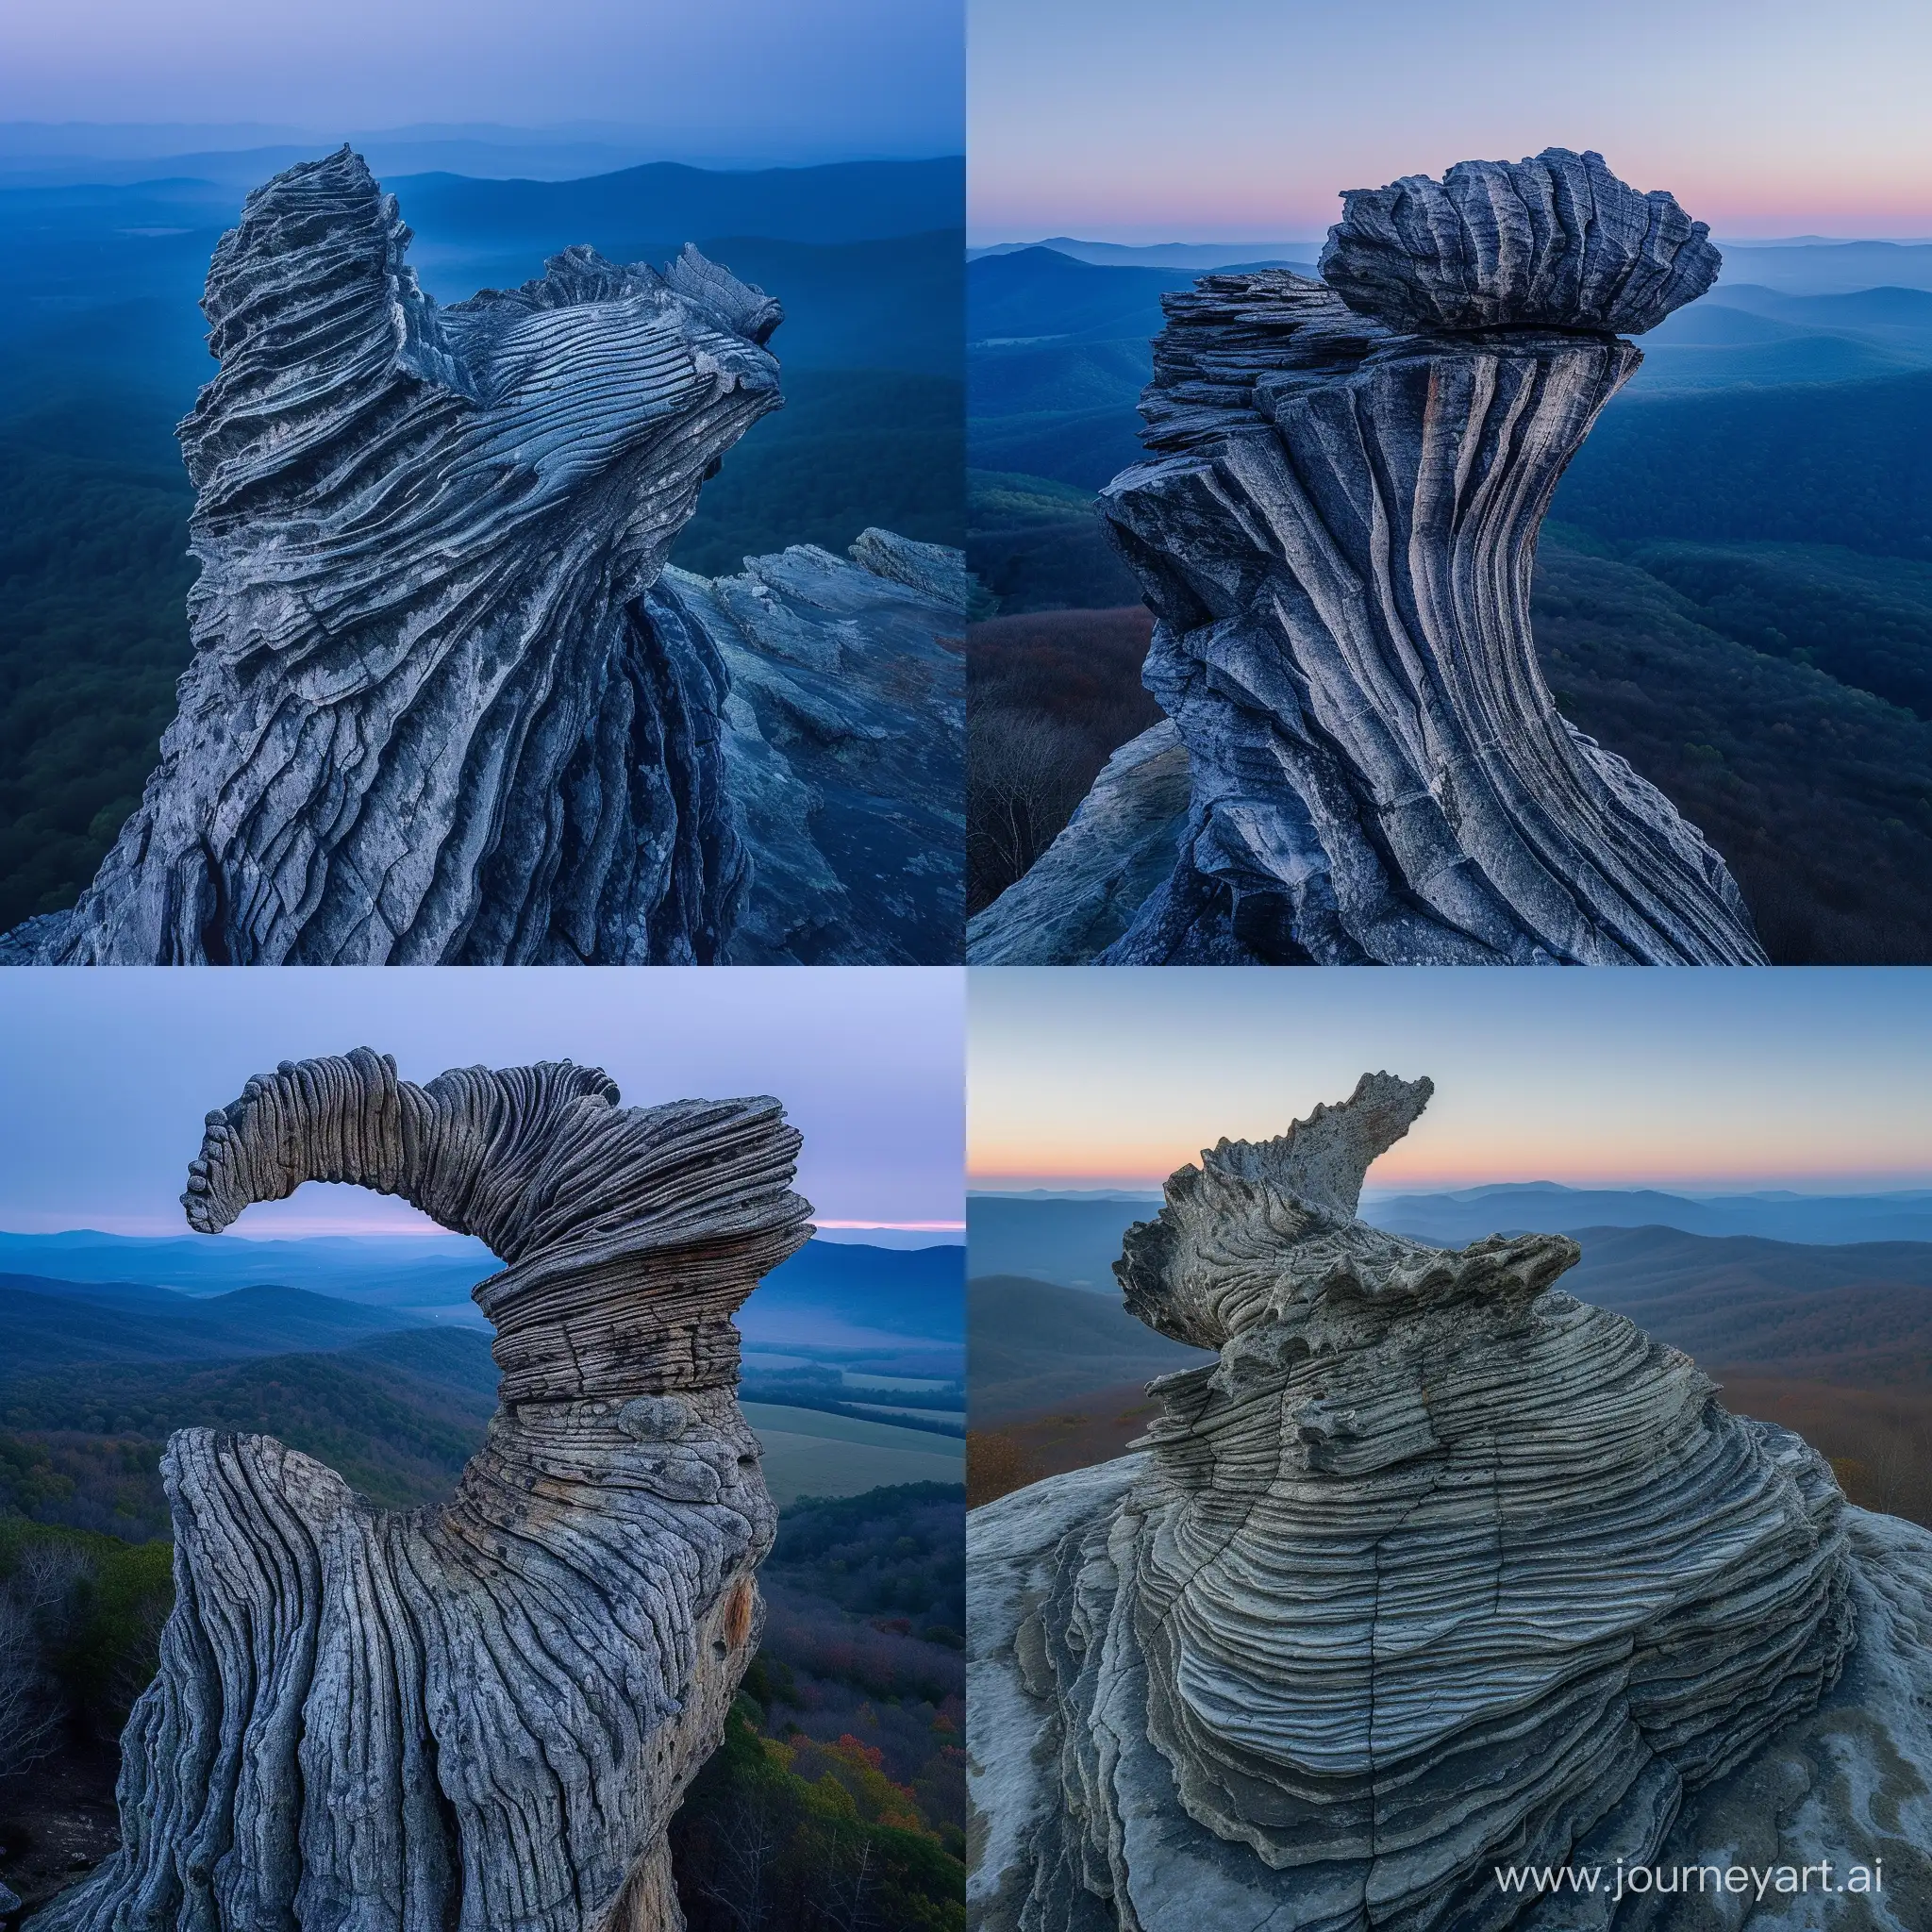 photo of humpback rock outcrop, outcrop is in the shape of a breaching humpback whale, looks exactly like a humpback whale, head shape and fin shape visible with striations, virginia, rolling blue ridge mountains in the background fading into deep blue, drone photography looking at the outcrop, morning, crisp, award winning landscape, sunrise, beautiful, gently lit by the sunrise